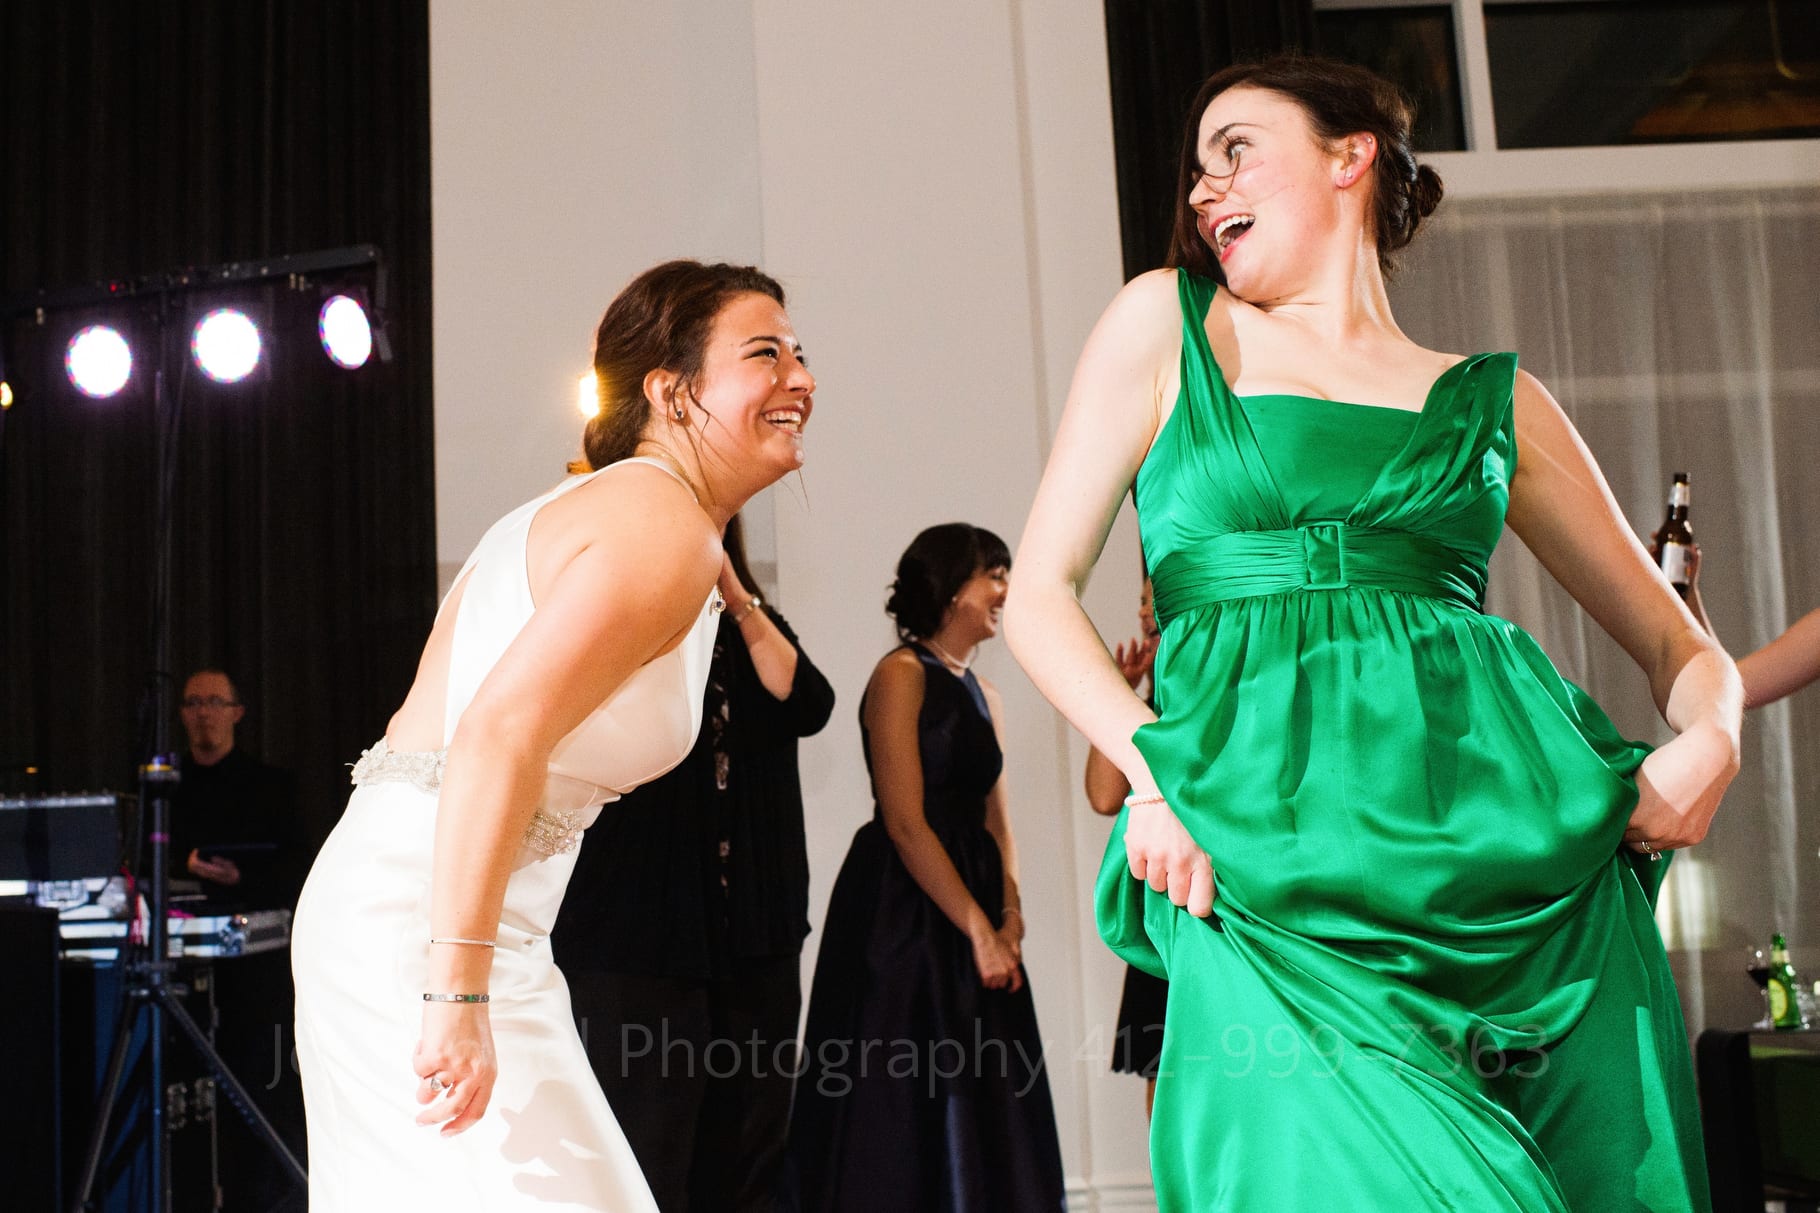 A woman in a green satin dress dances with a bride in a white dress at her Hotel Monaco wedding.